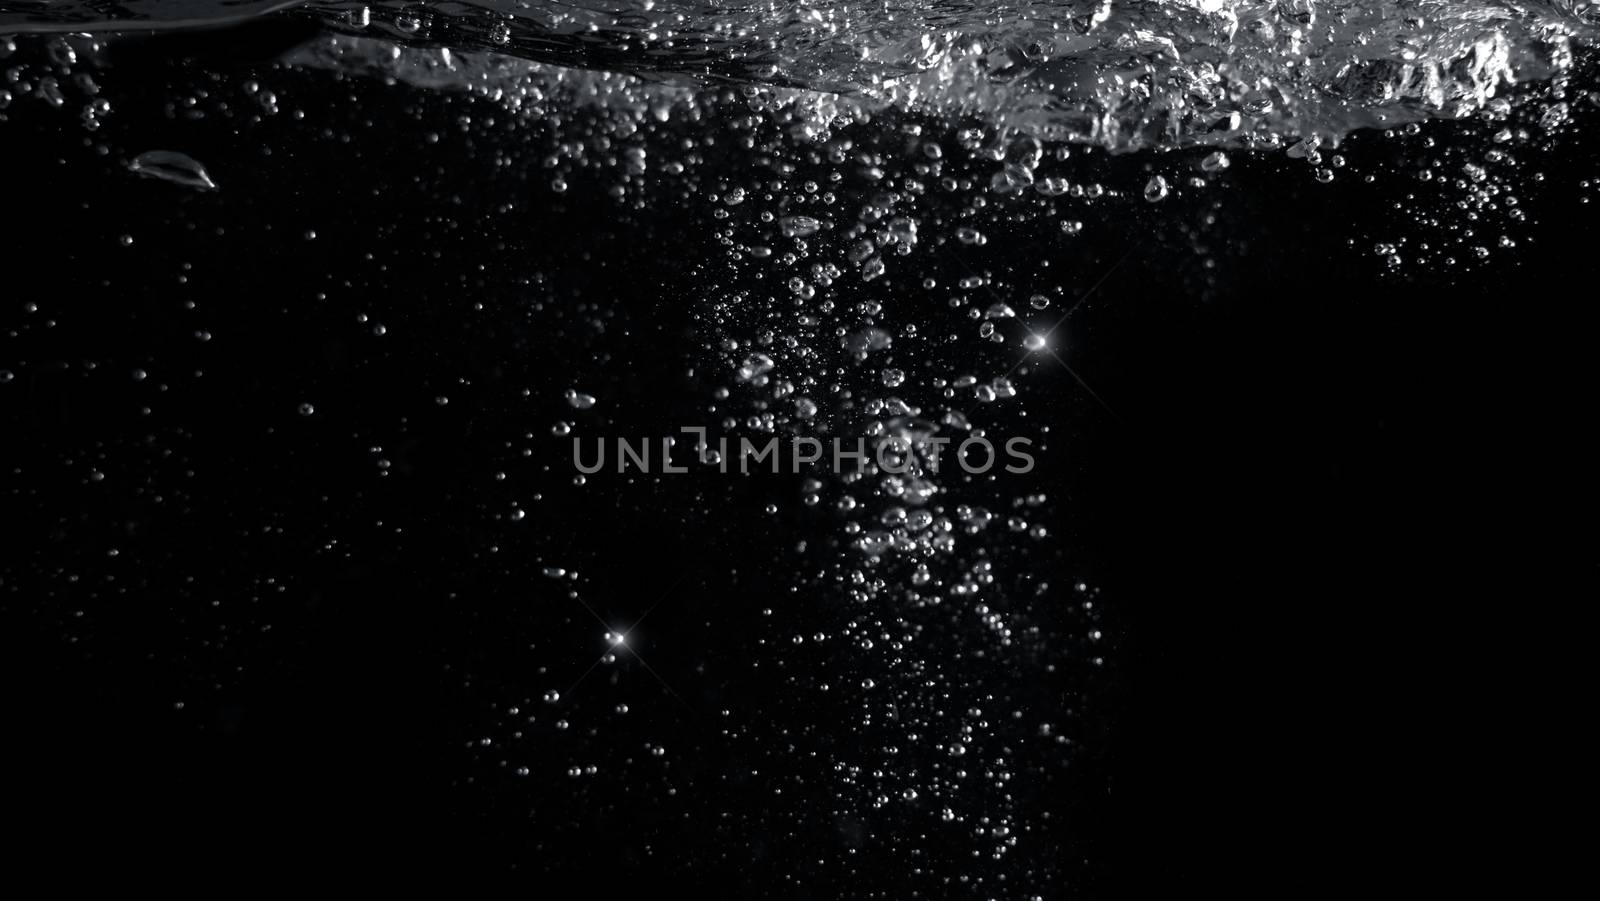 Blurred images of close-up soda water bubbles fizzing up or splashing or sparkling like a exploding of a bomb on black background for represent refreshing from carbonated drinks menu.